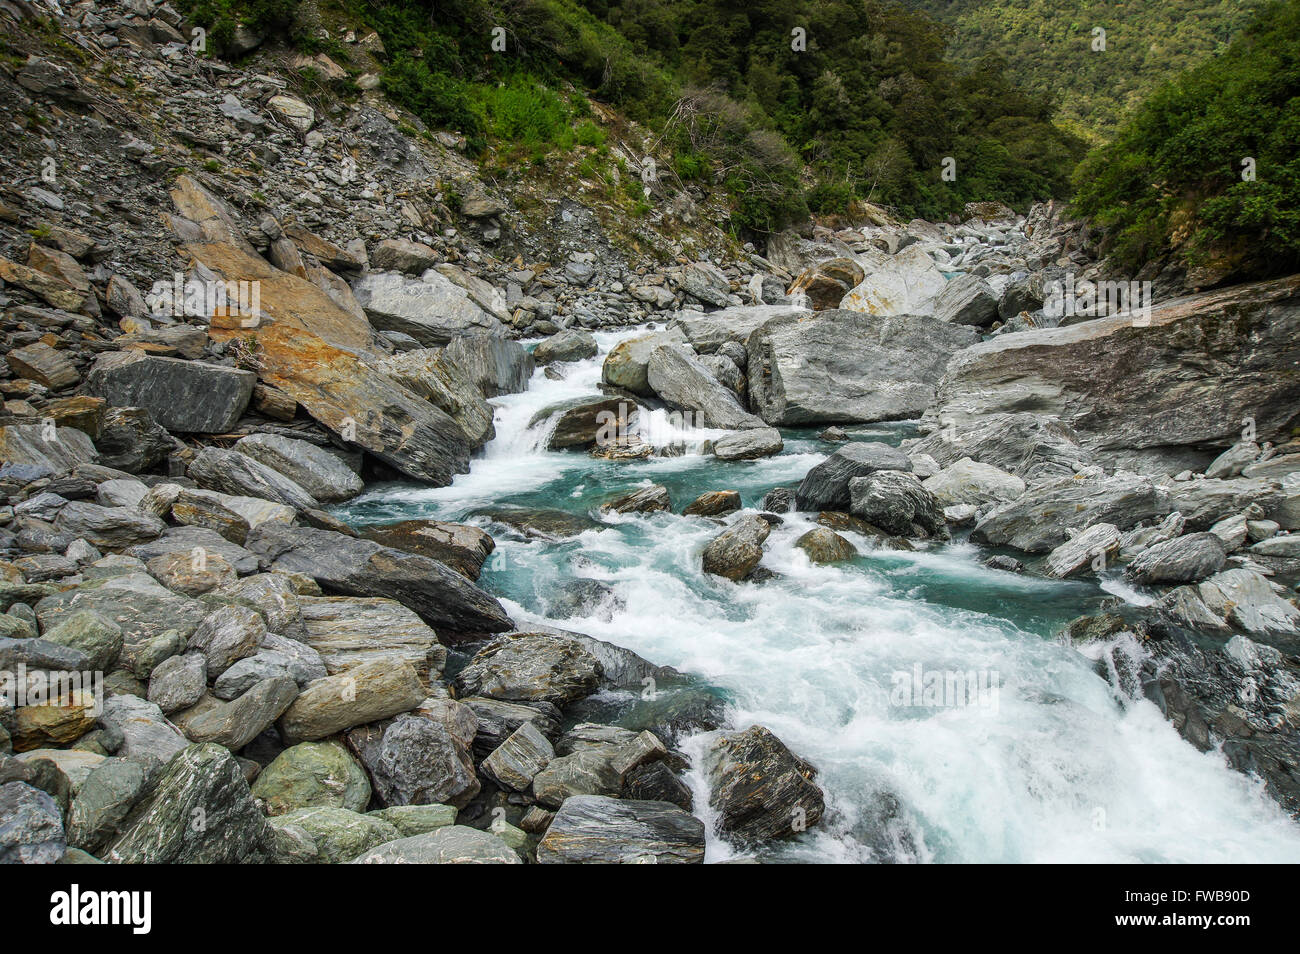 Haast River flowing down a mountain in the Haast Pass area in West Coast region of South Island, New Zealand Stock Photo